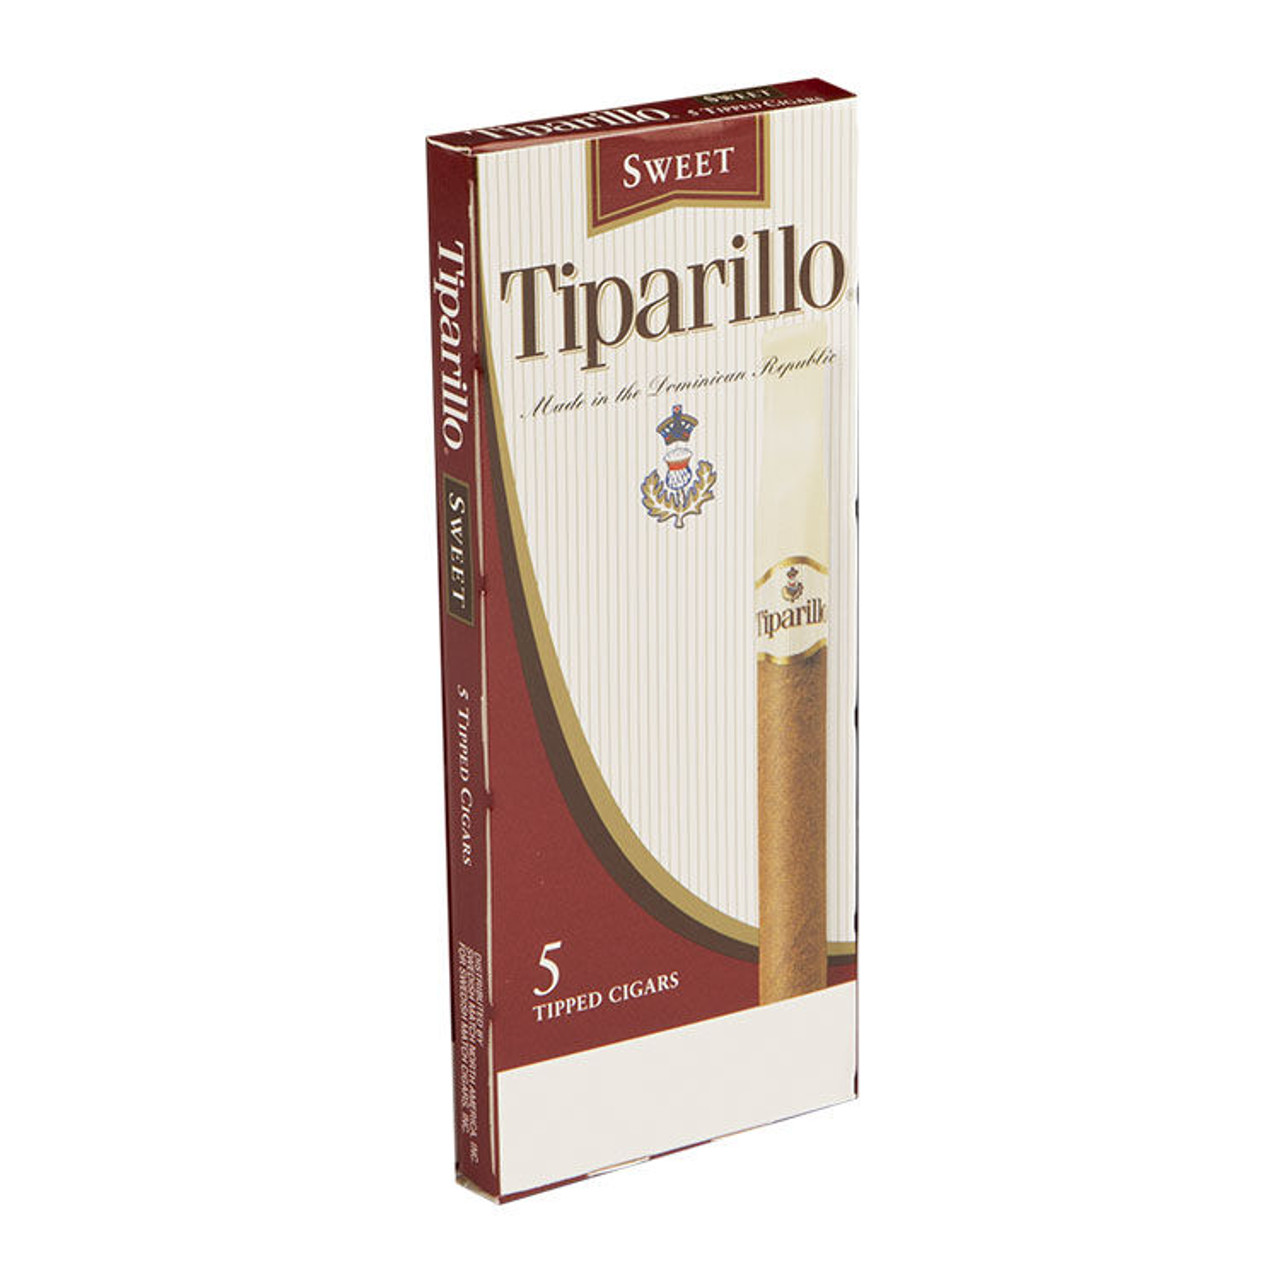 Tiparillo Sweet Cigars - 5 x 30 (10 Packs of 5) Single Pack